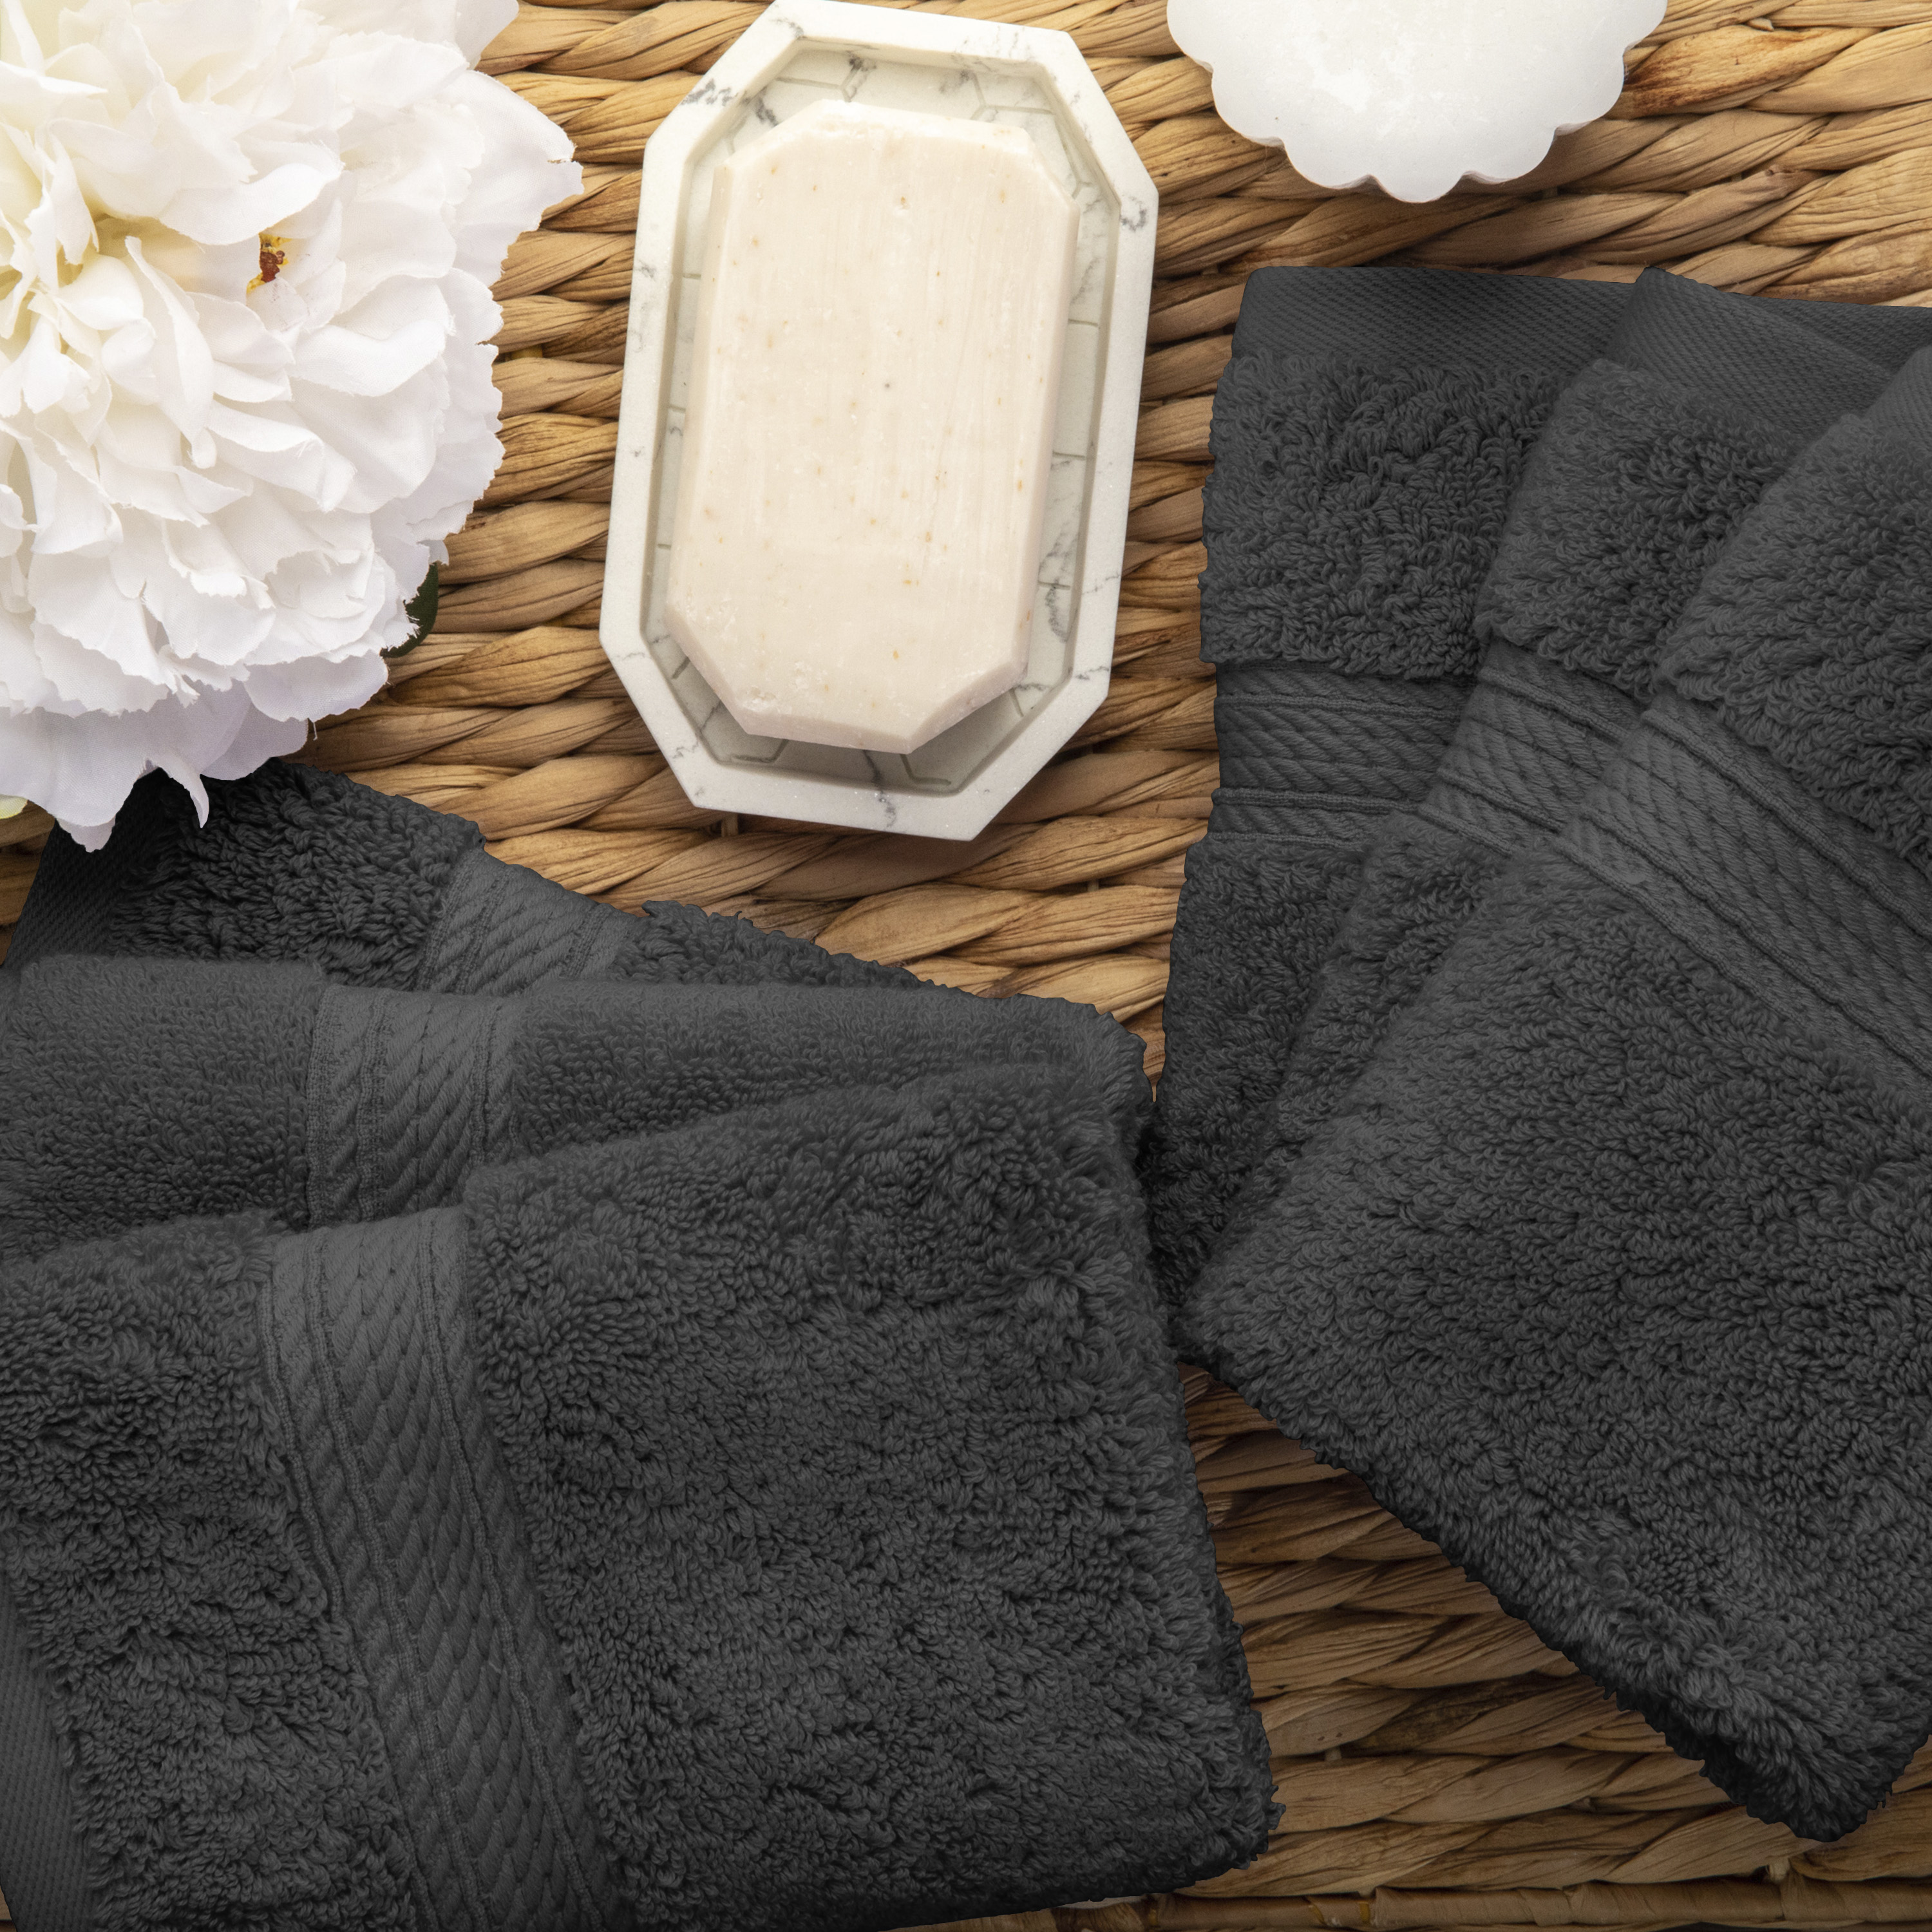 Superior Hymnia Egyptian Cotton Face Towel Set, Charcoal - image 4 of 6